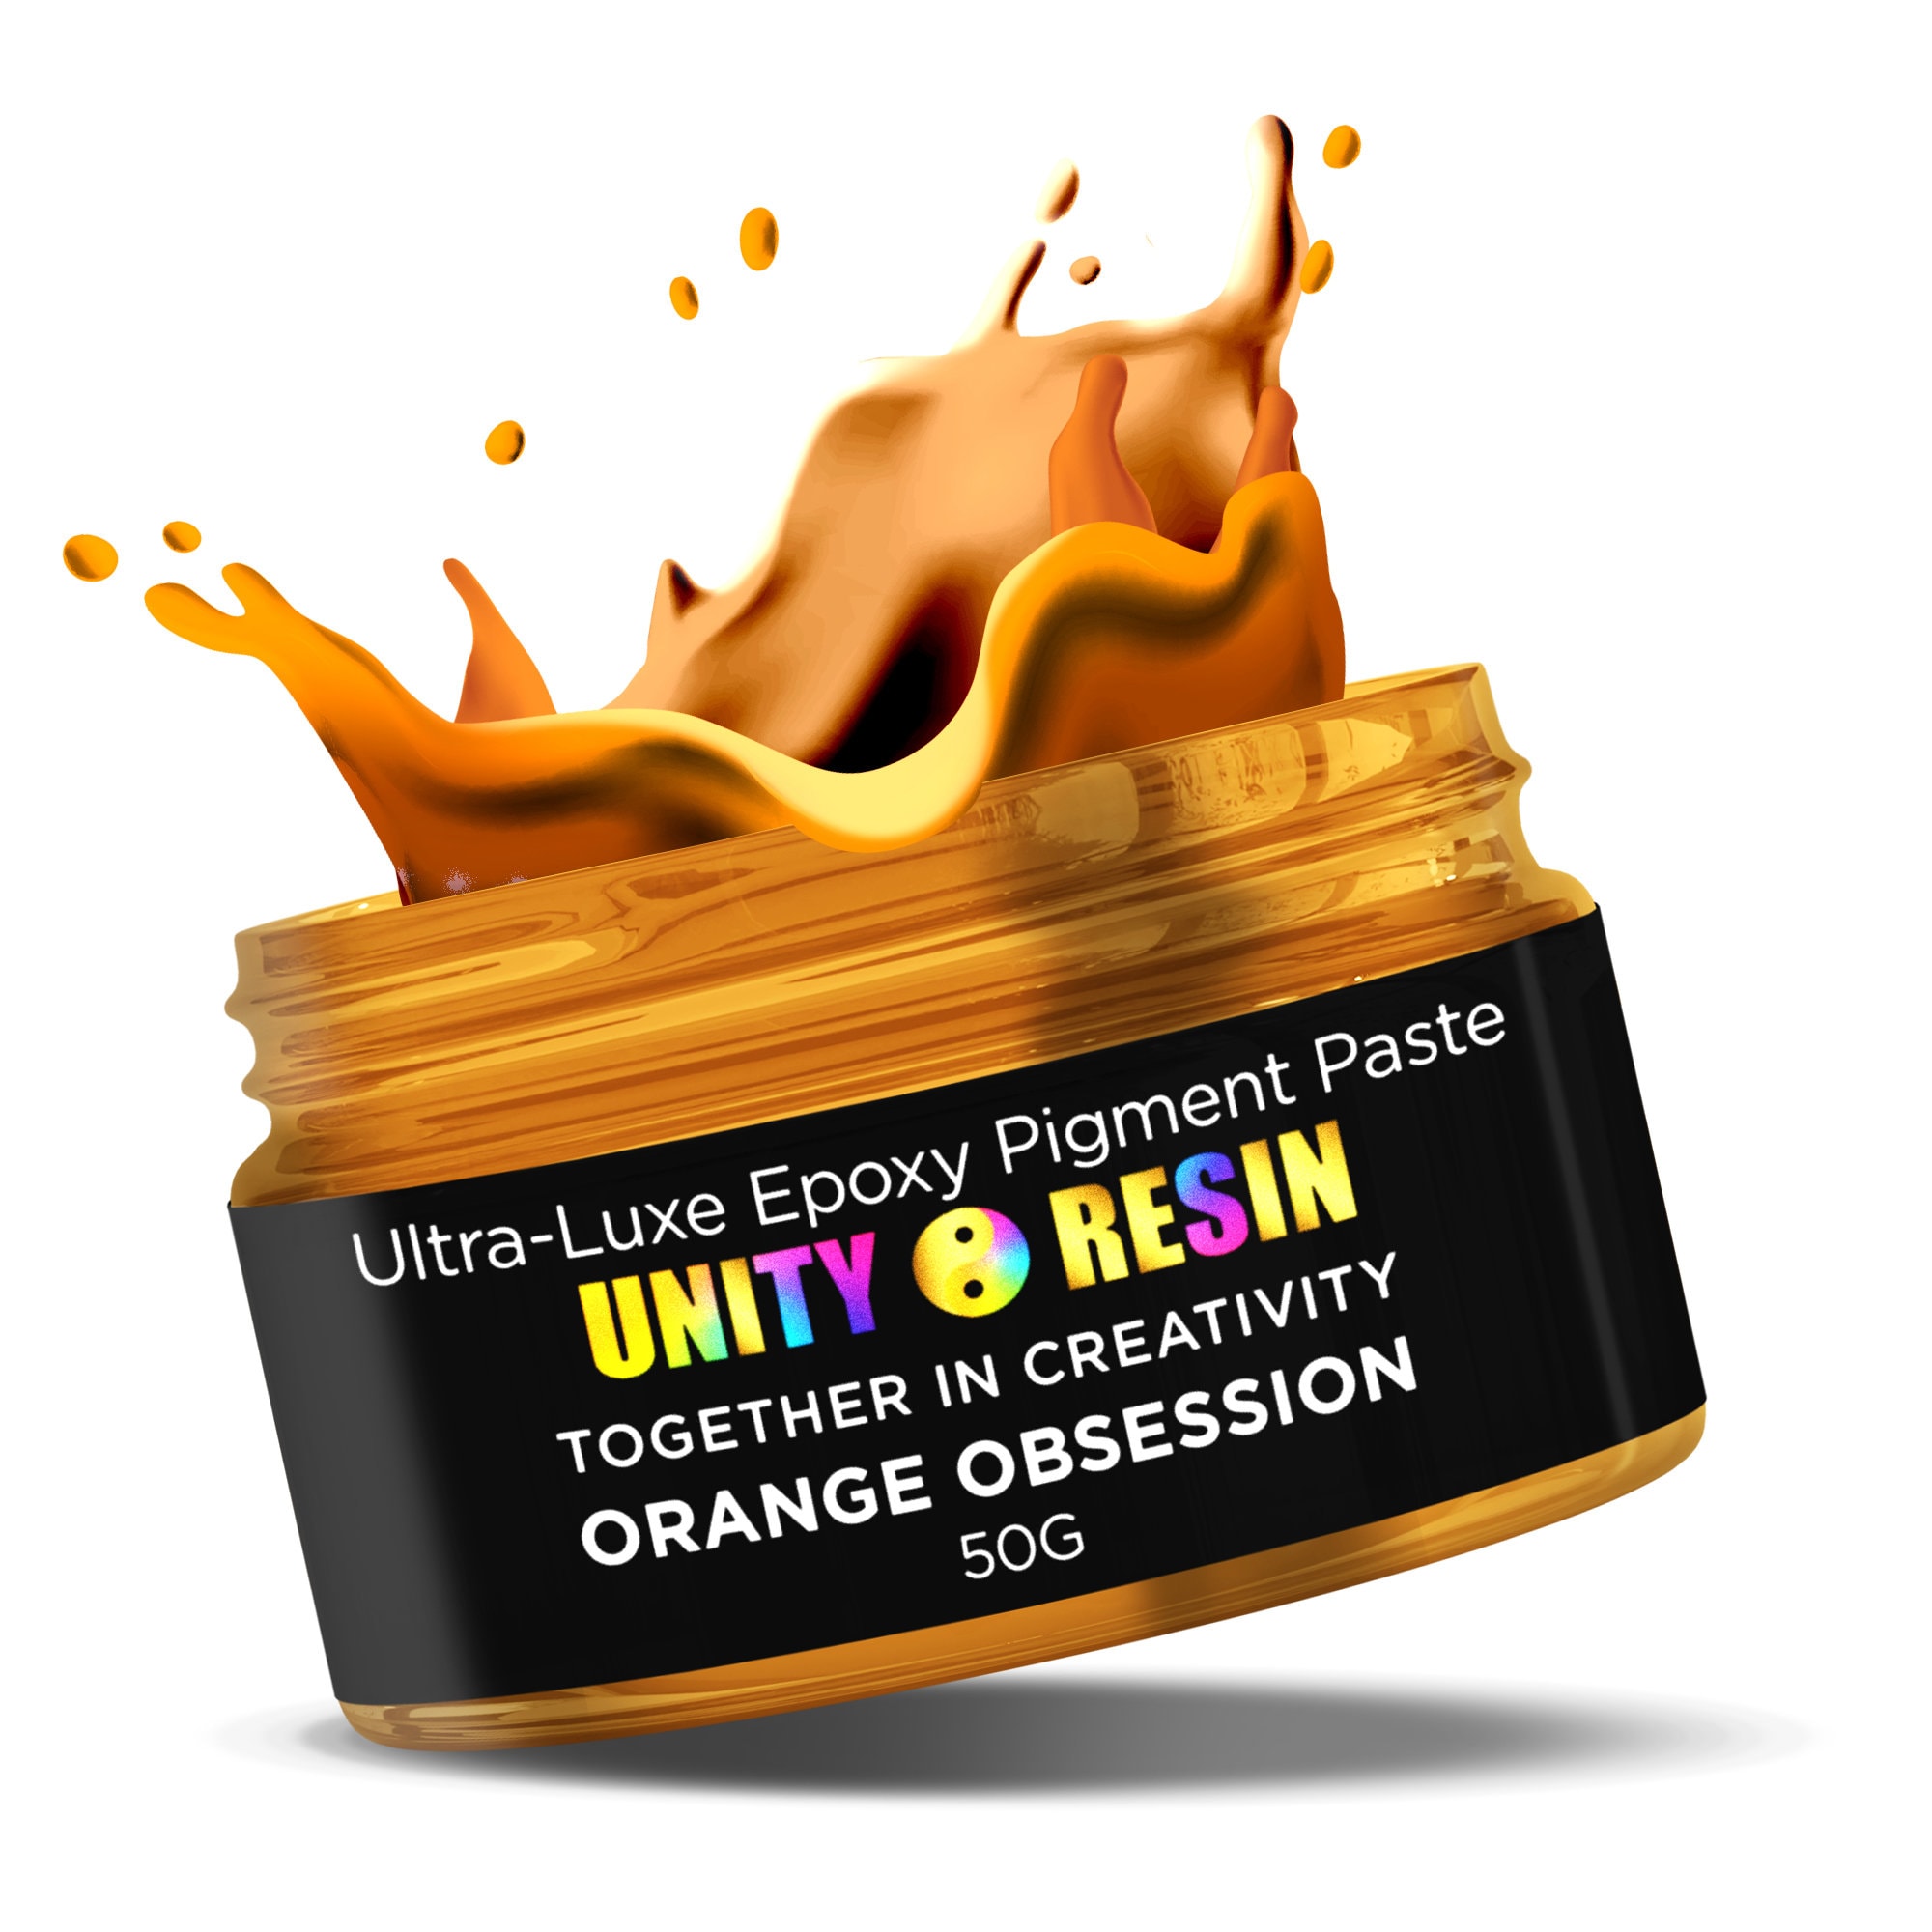 Buy the Best Resin Dyes and Pigments, Shop Colors at Resin Obsession